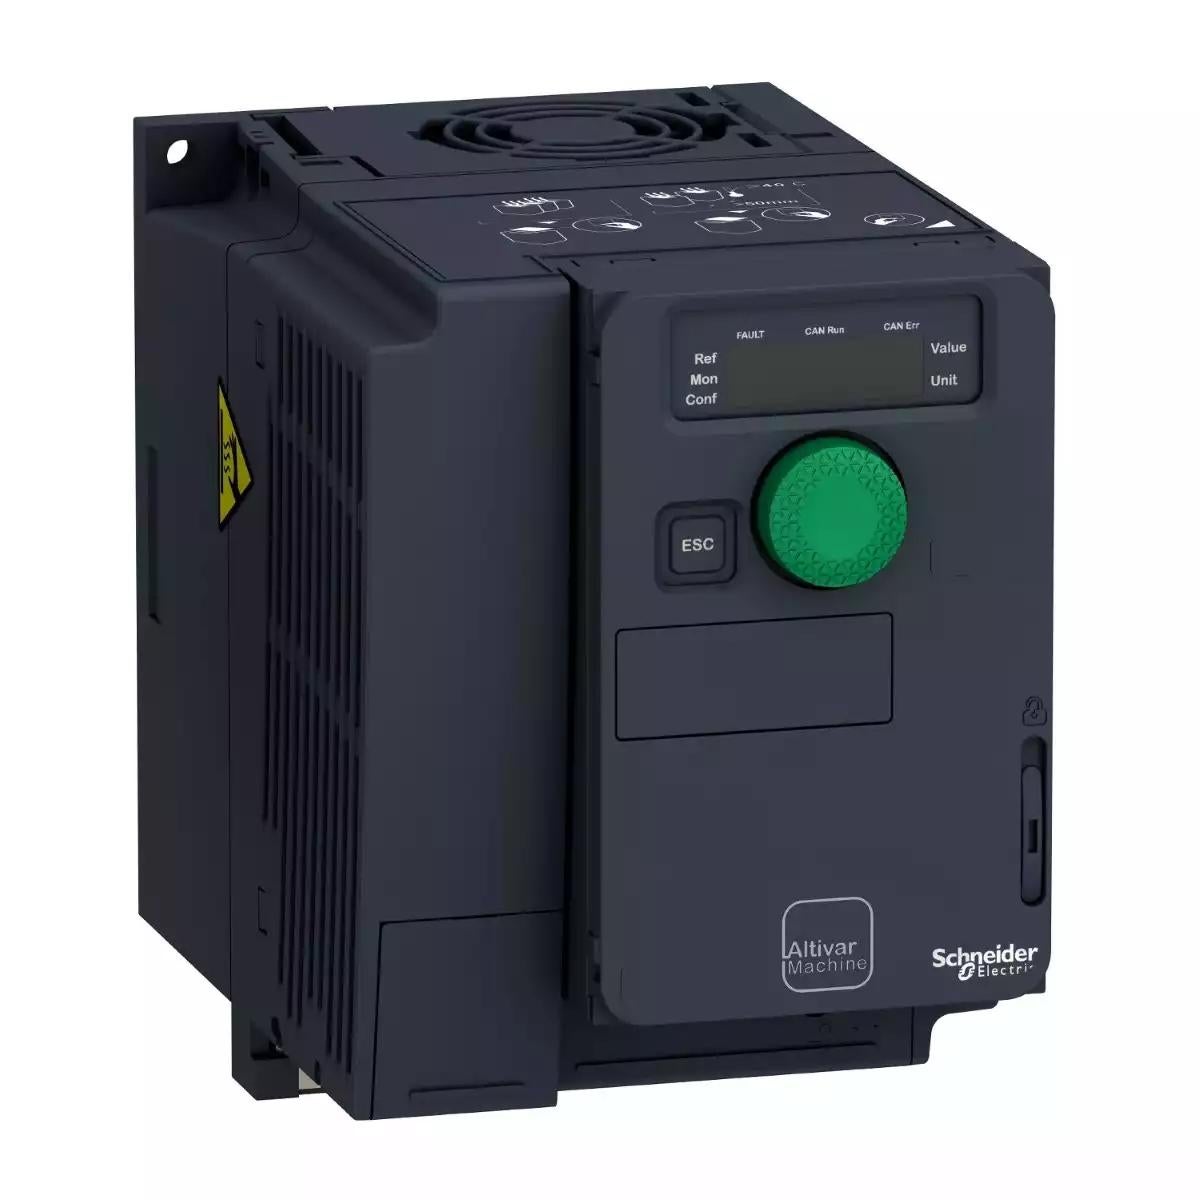 variable speed drive, Altivar Machine ATV320, 1.5kW, 200 to 240V, 1 phase, compact